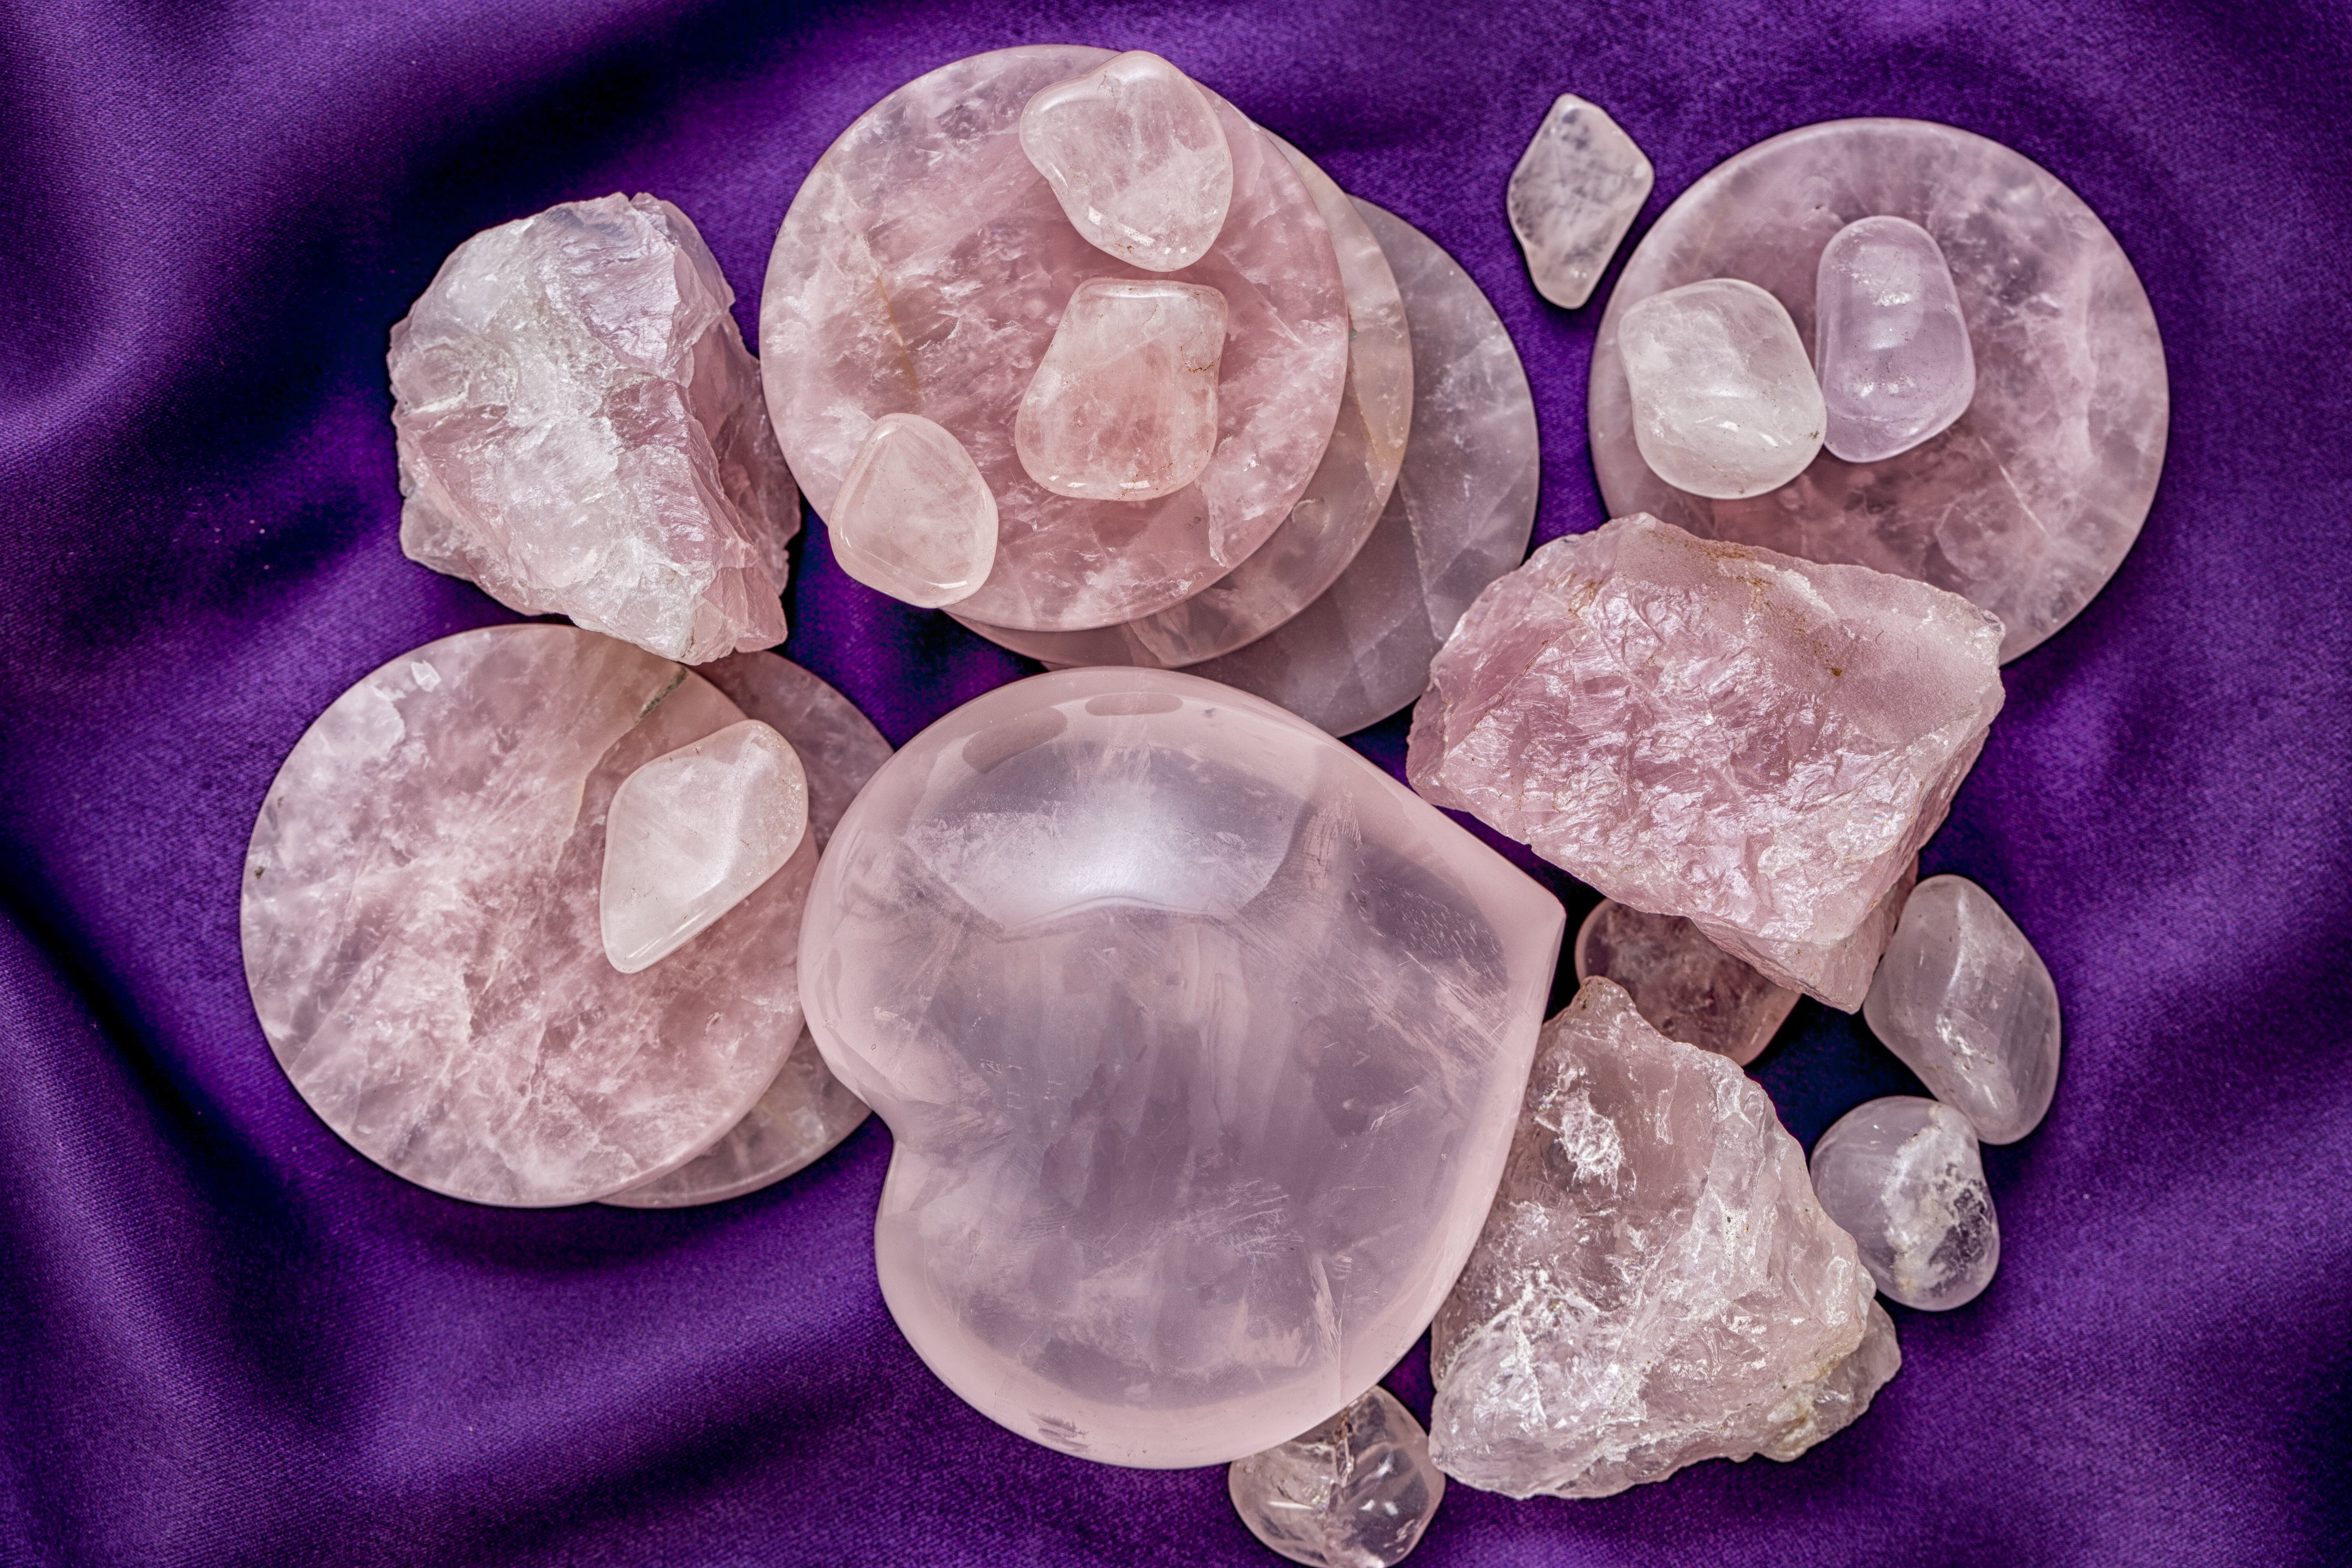 Lots of pieces of rose quartz in different shapes including a large love heart piece